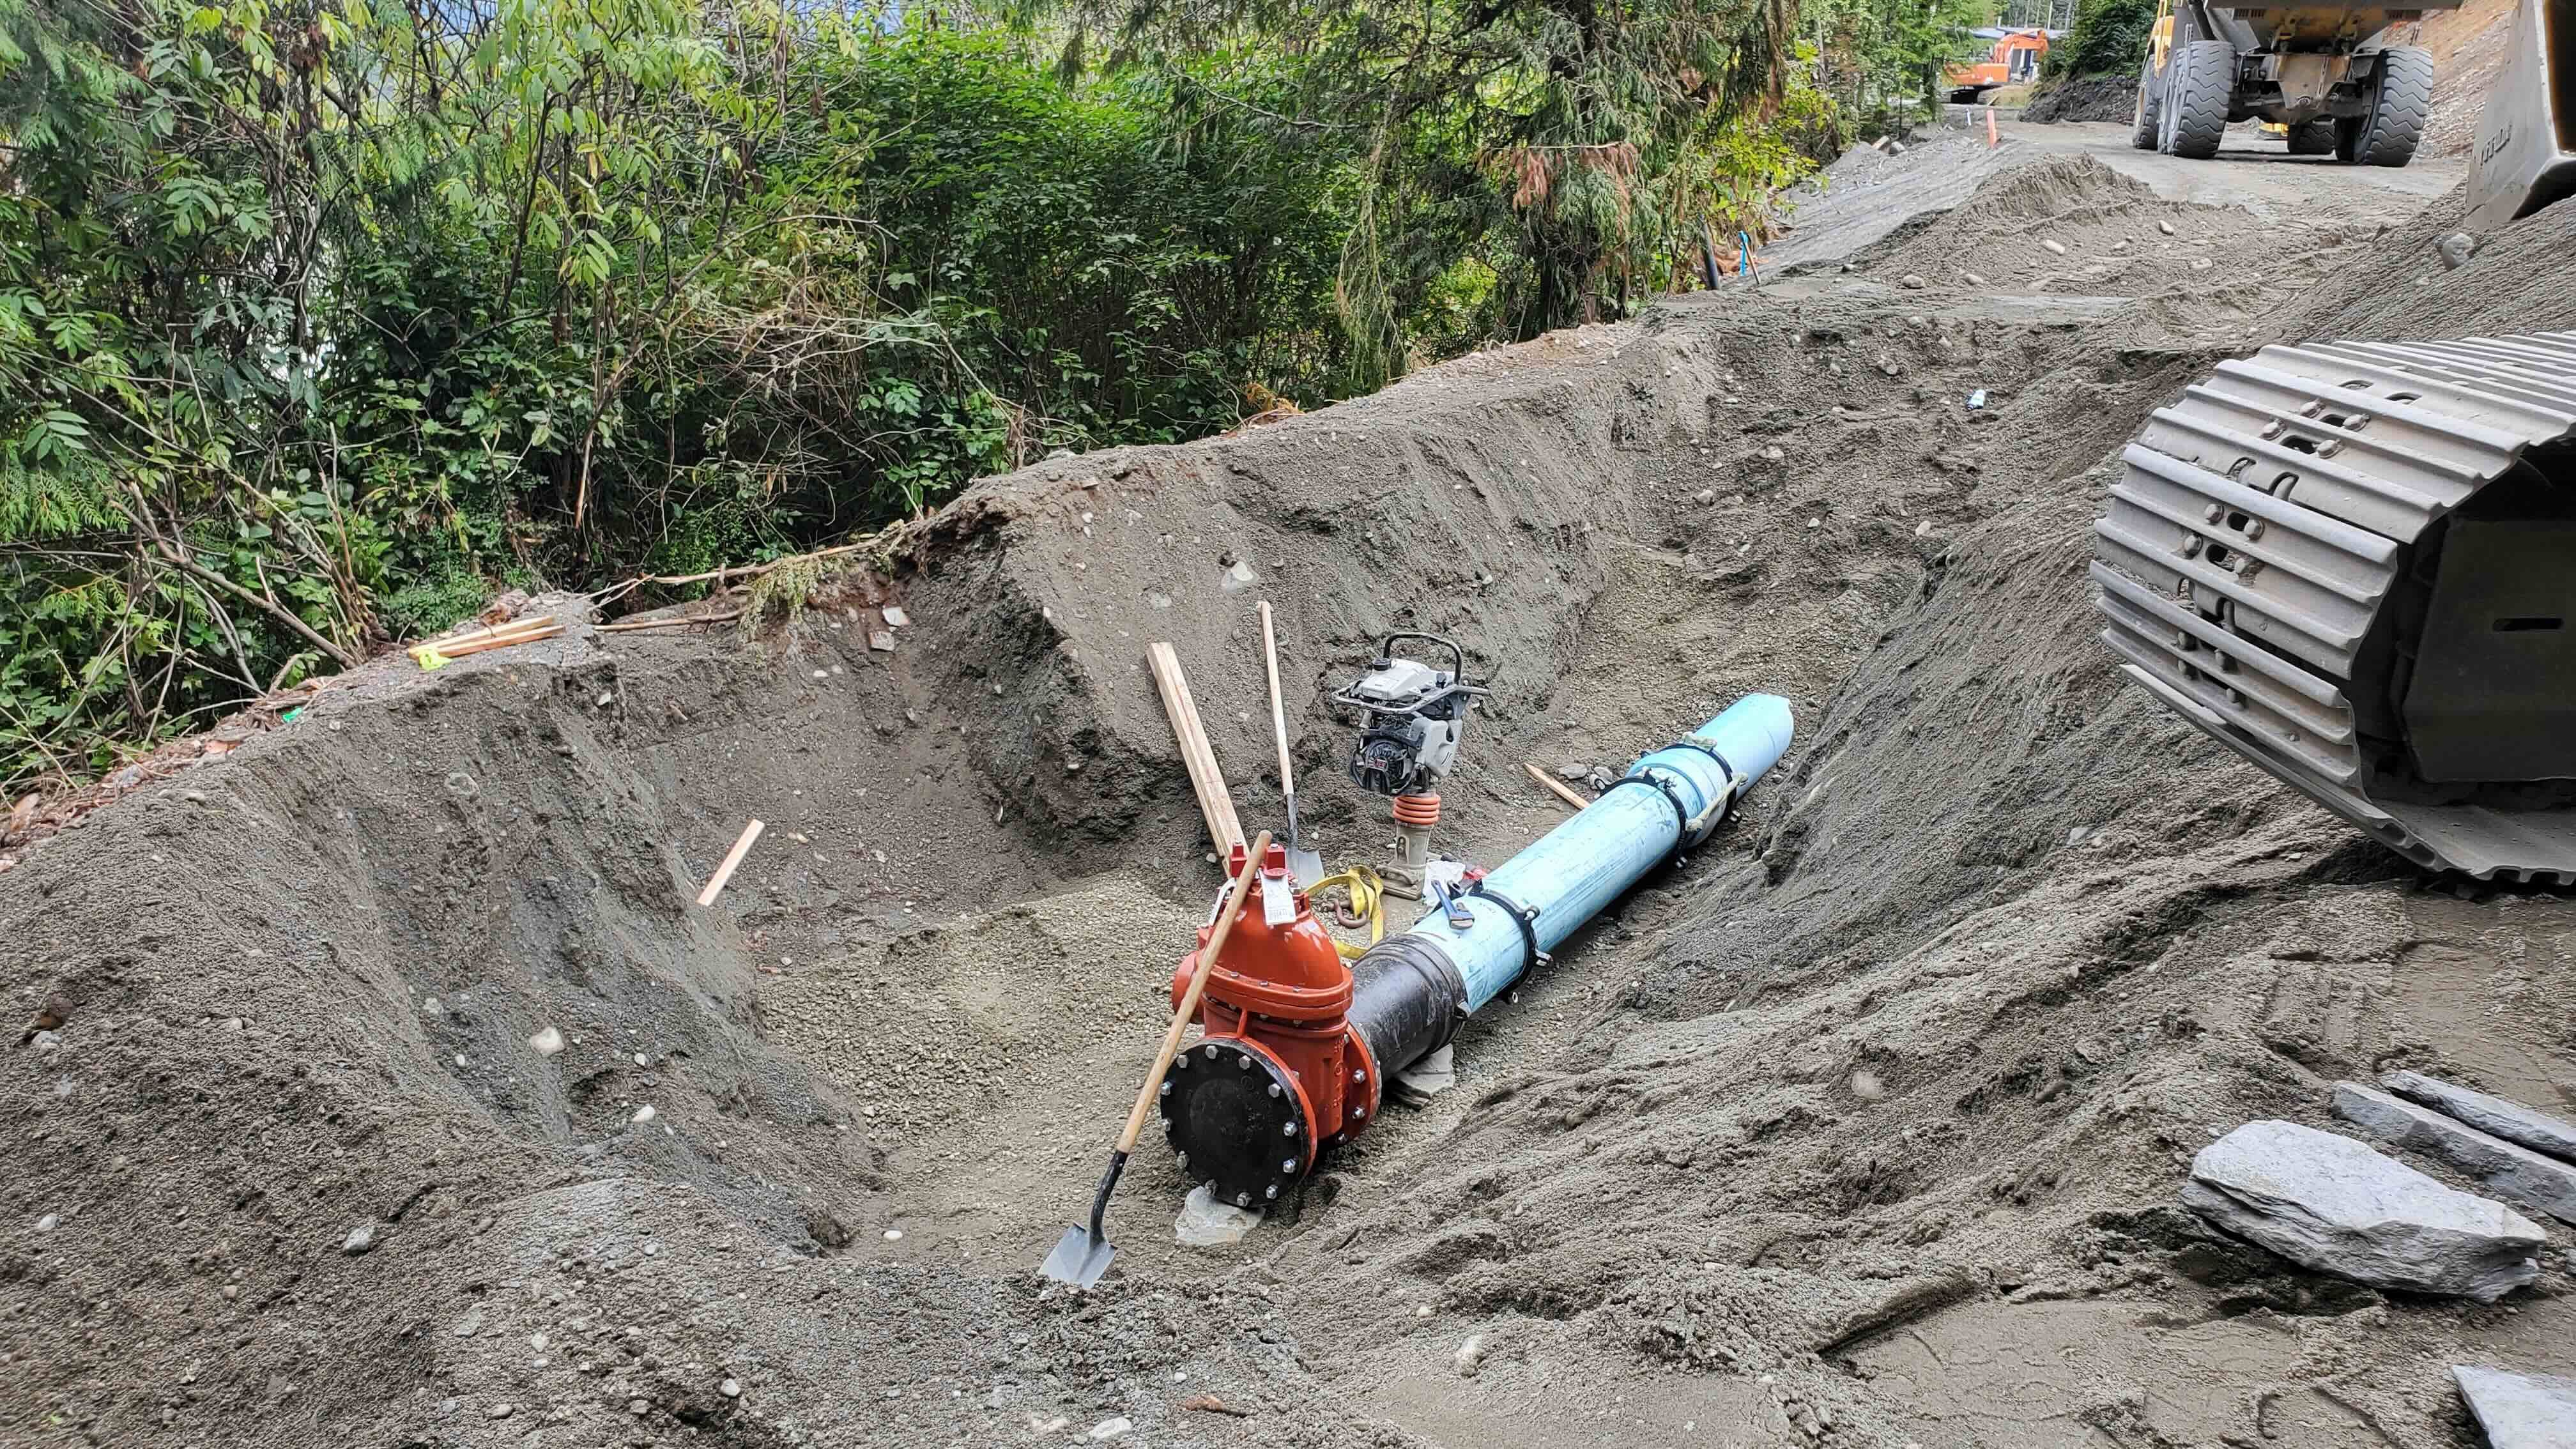 Fire Hydrant Connection Valve Installation for Port Renfrew Community Safety